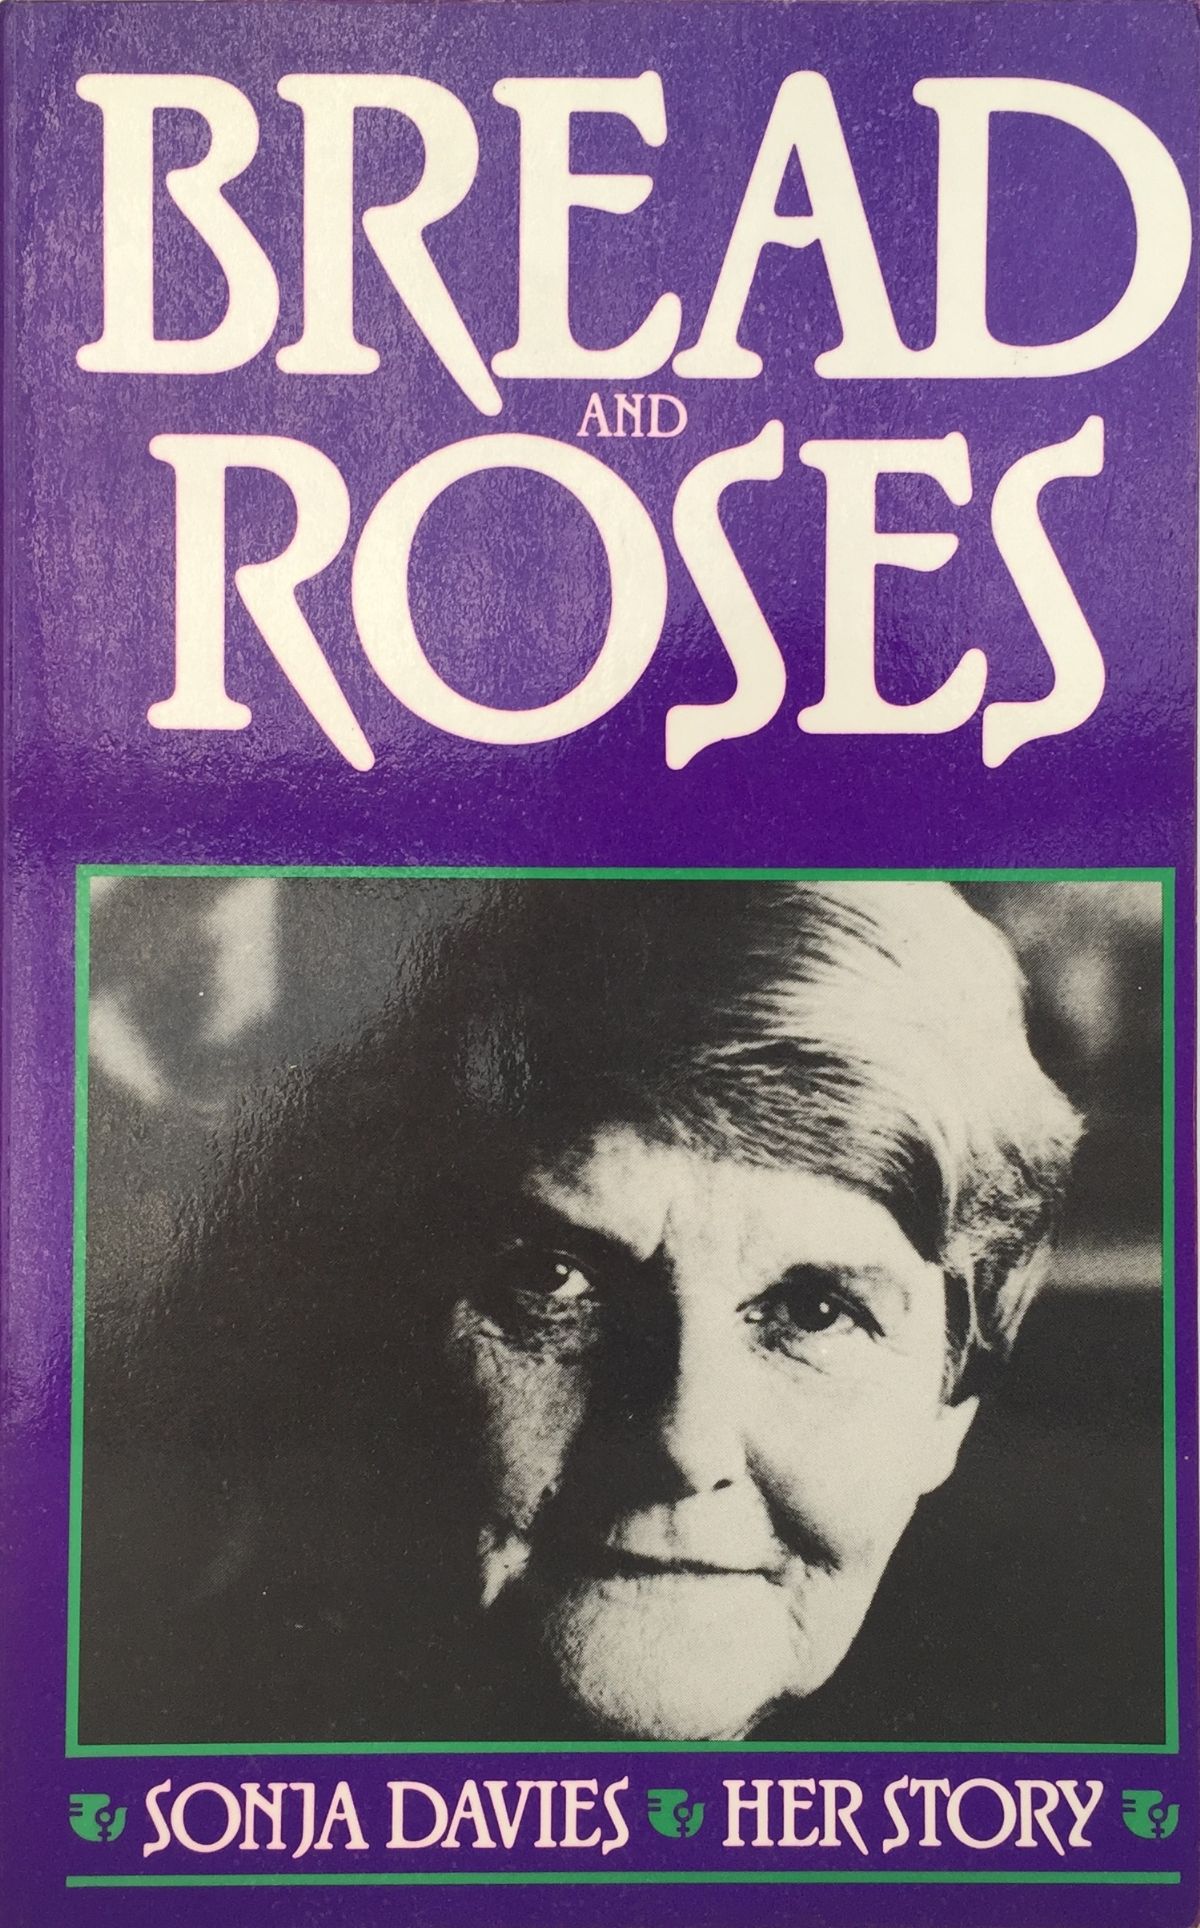 BREAD AND ROSES : Sonja Davies Her Story